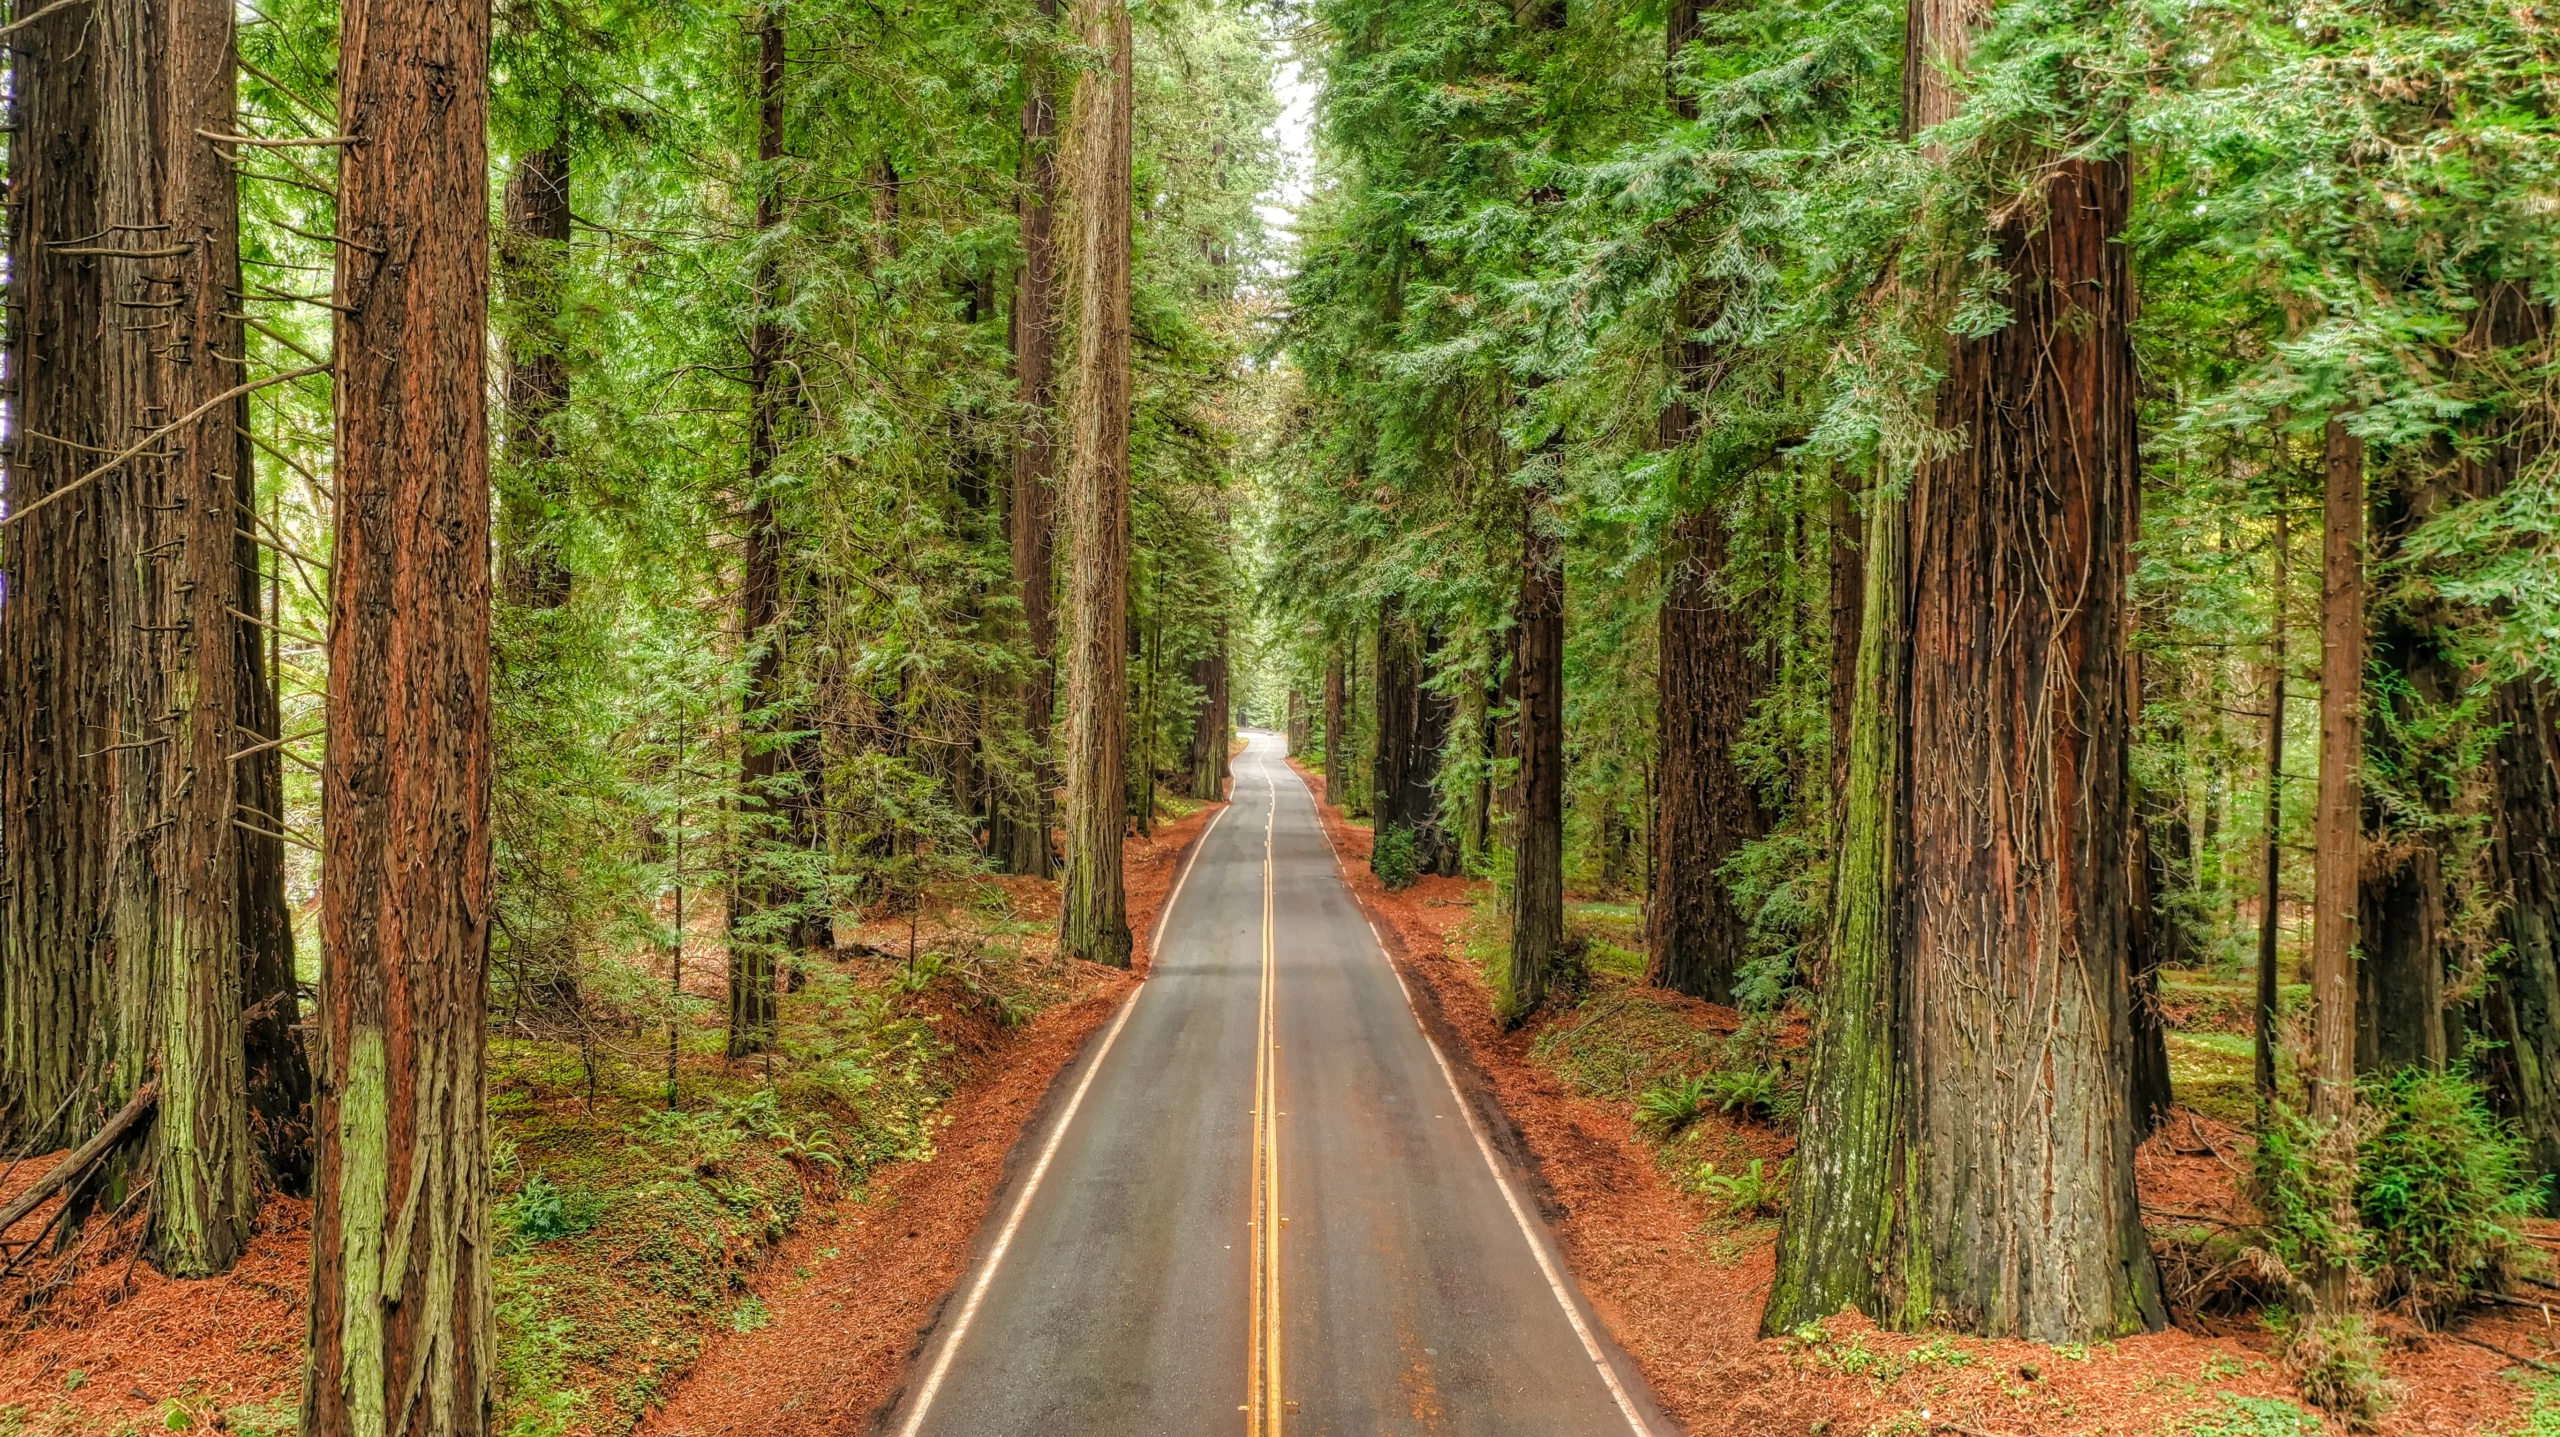 Sweeping view of the Avenue of the Giants, a majestic road flanked by towering ancient redwoods in Humboldt County, California